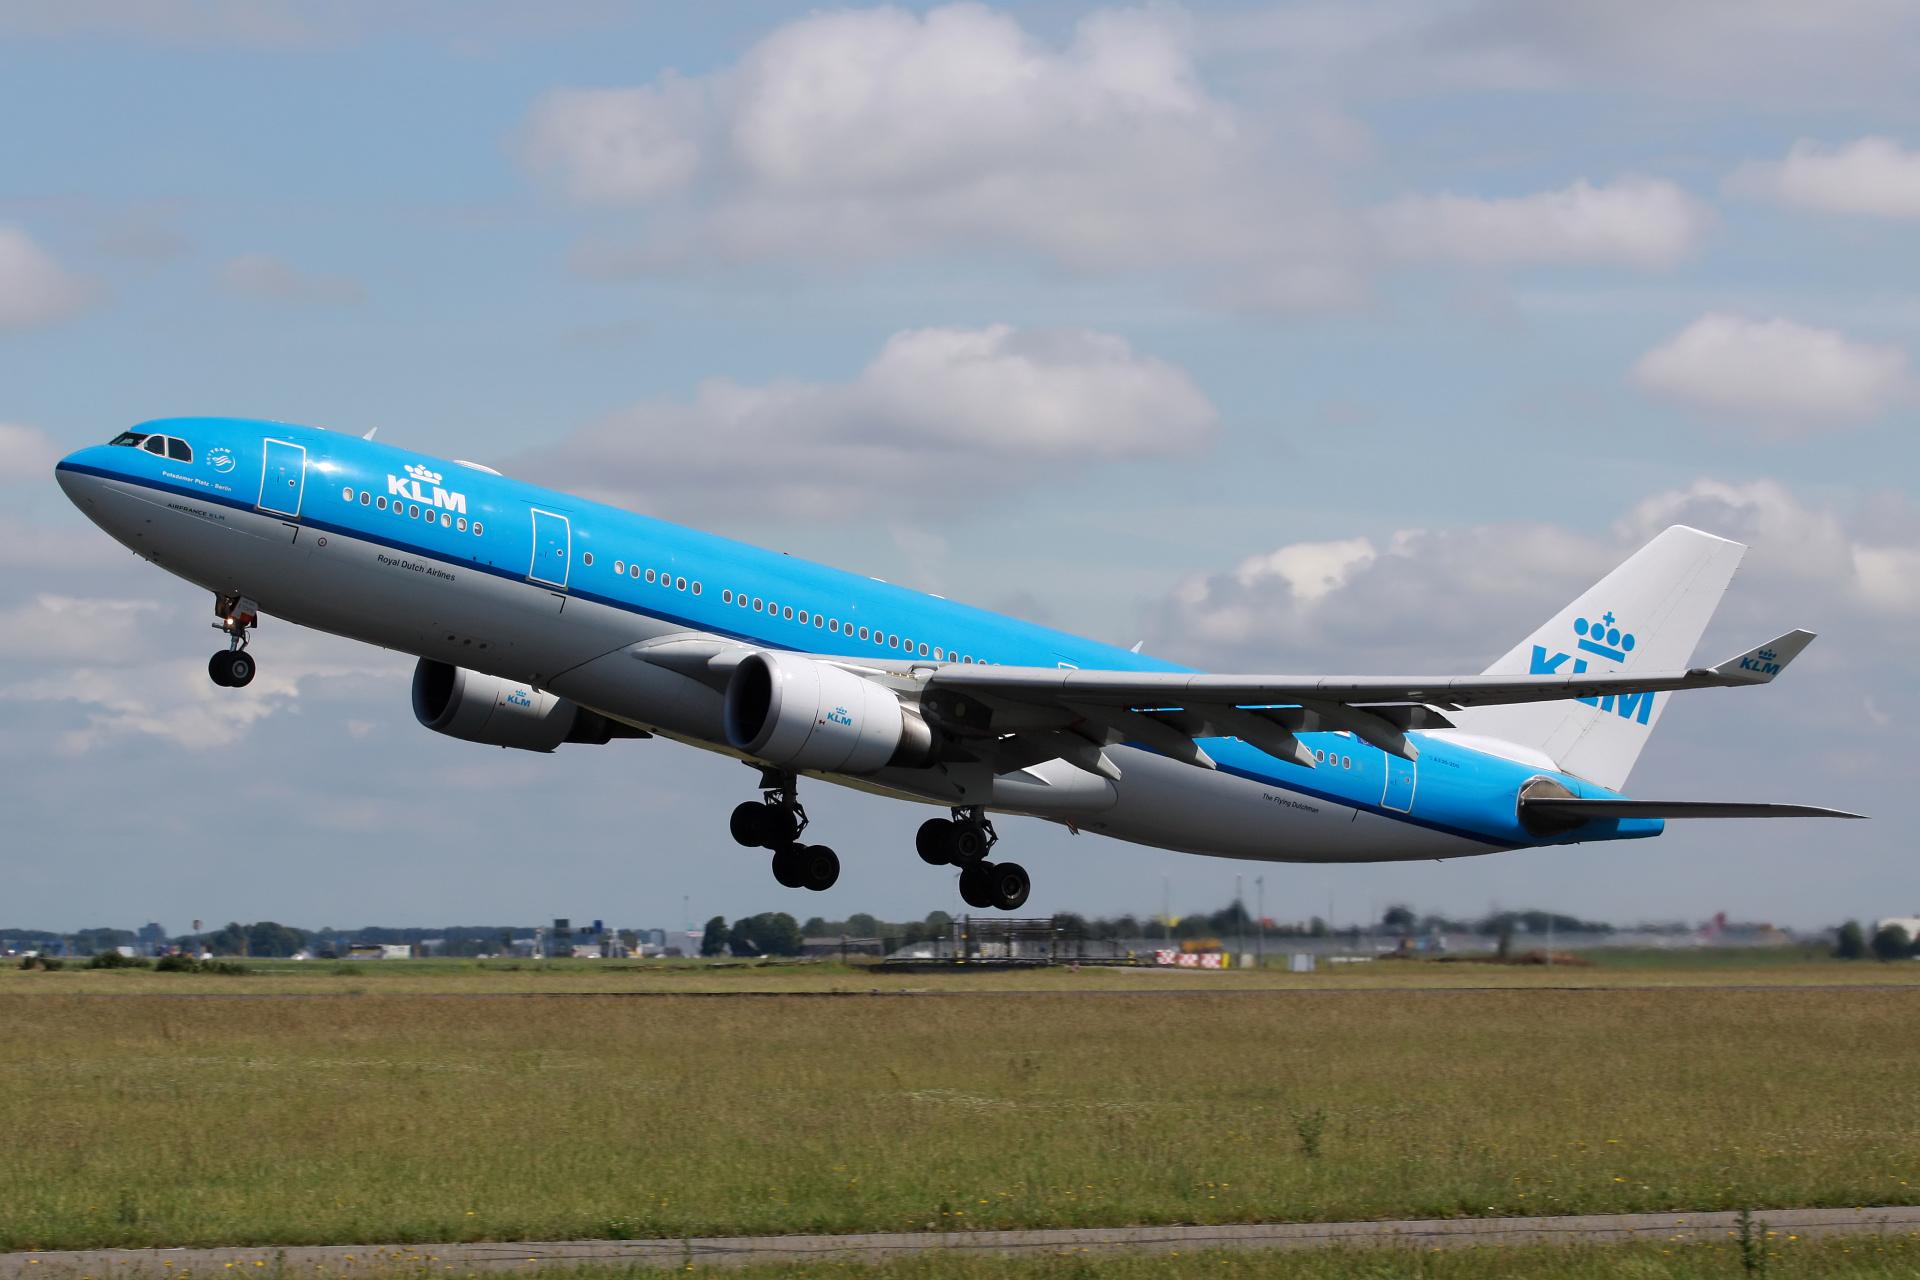 PH-AOB (Aircraft » Schiphol Spotting » Airbus A330-200 » KLM Royal Dutch Airlines)